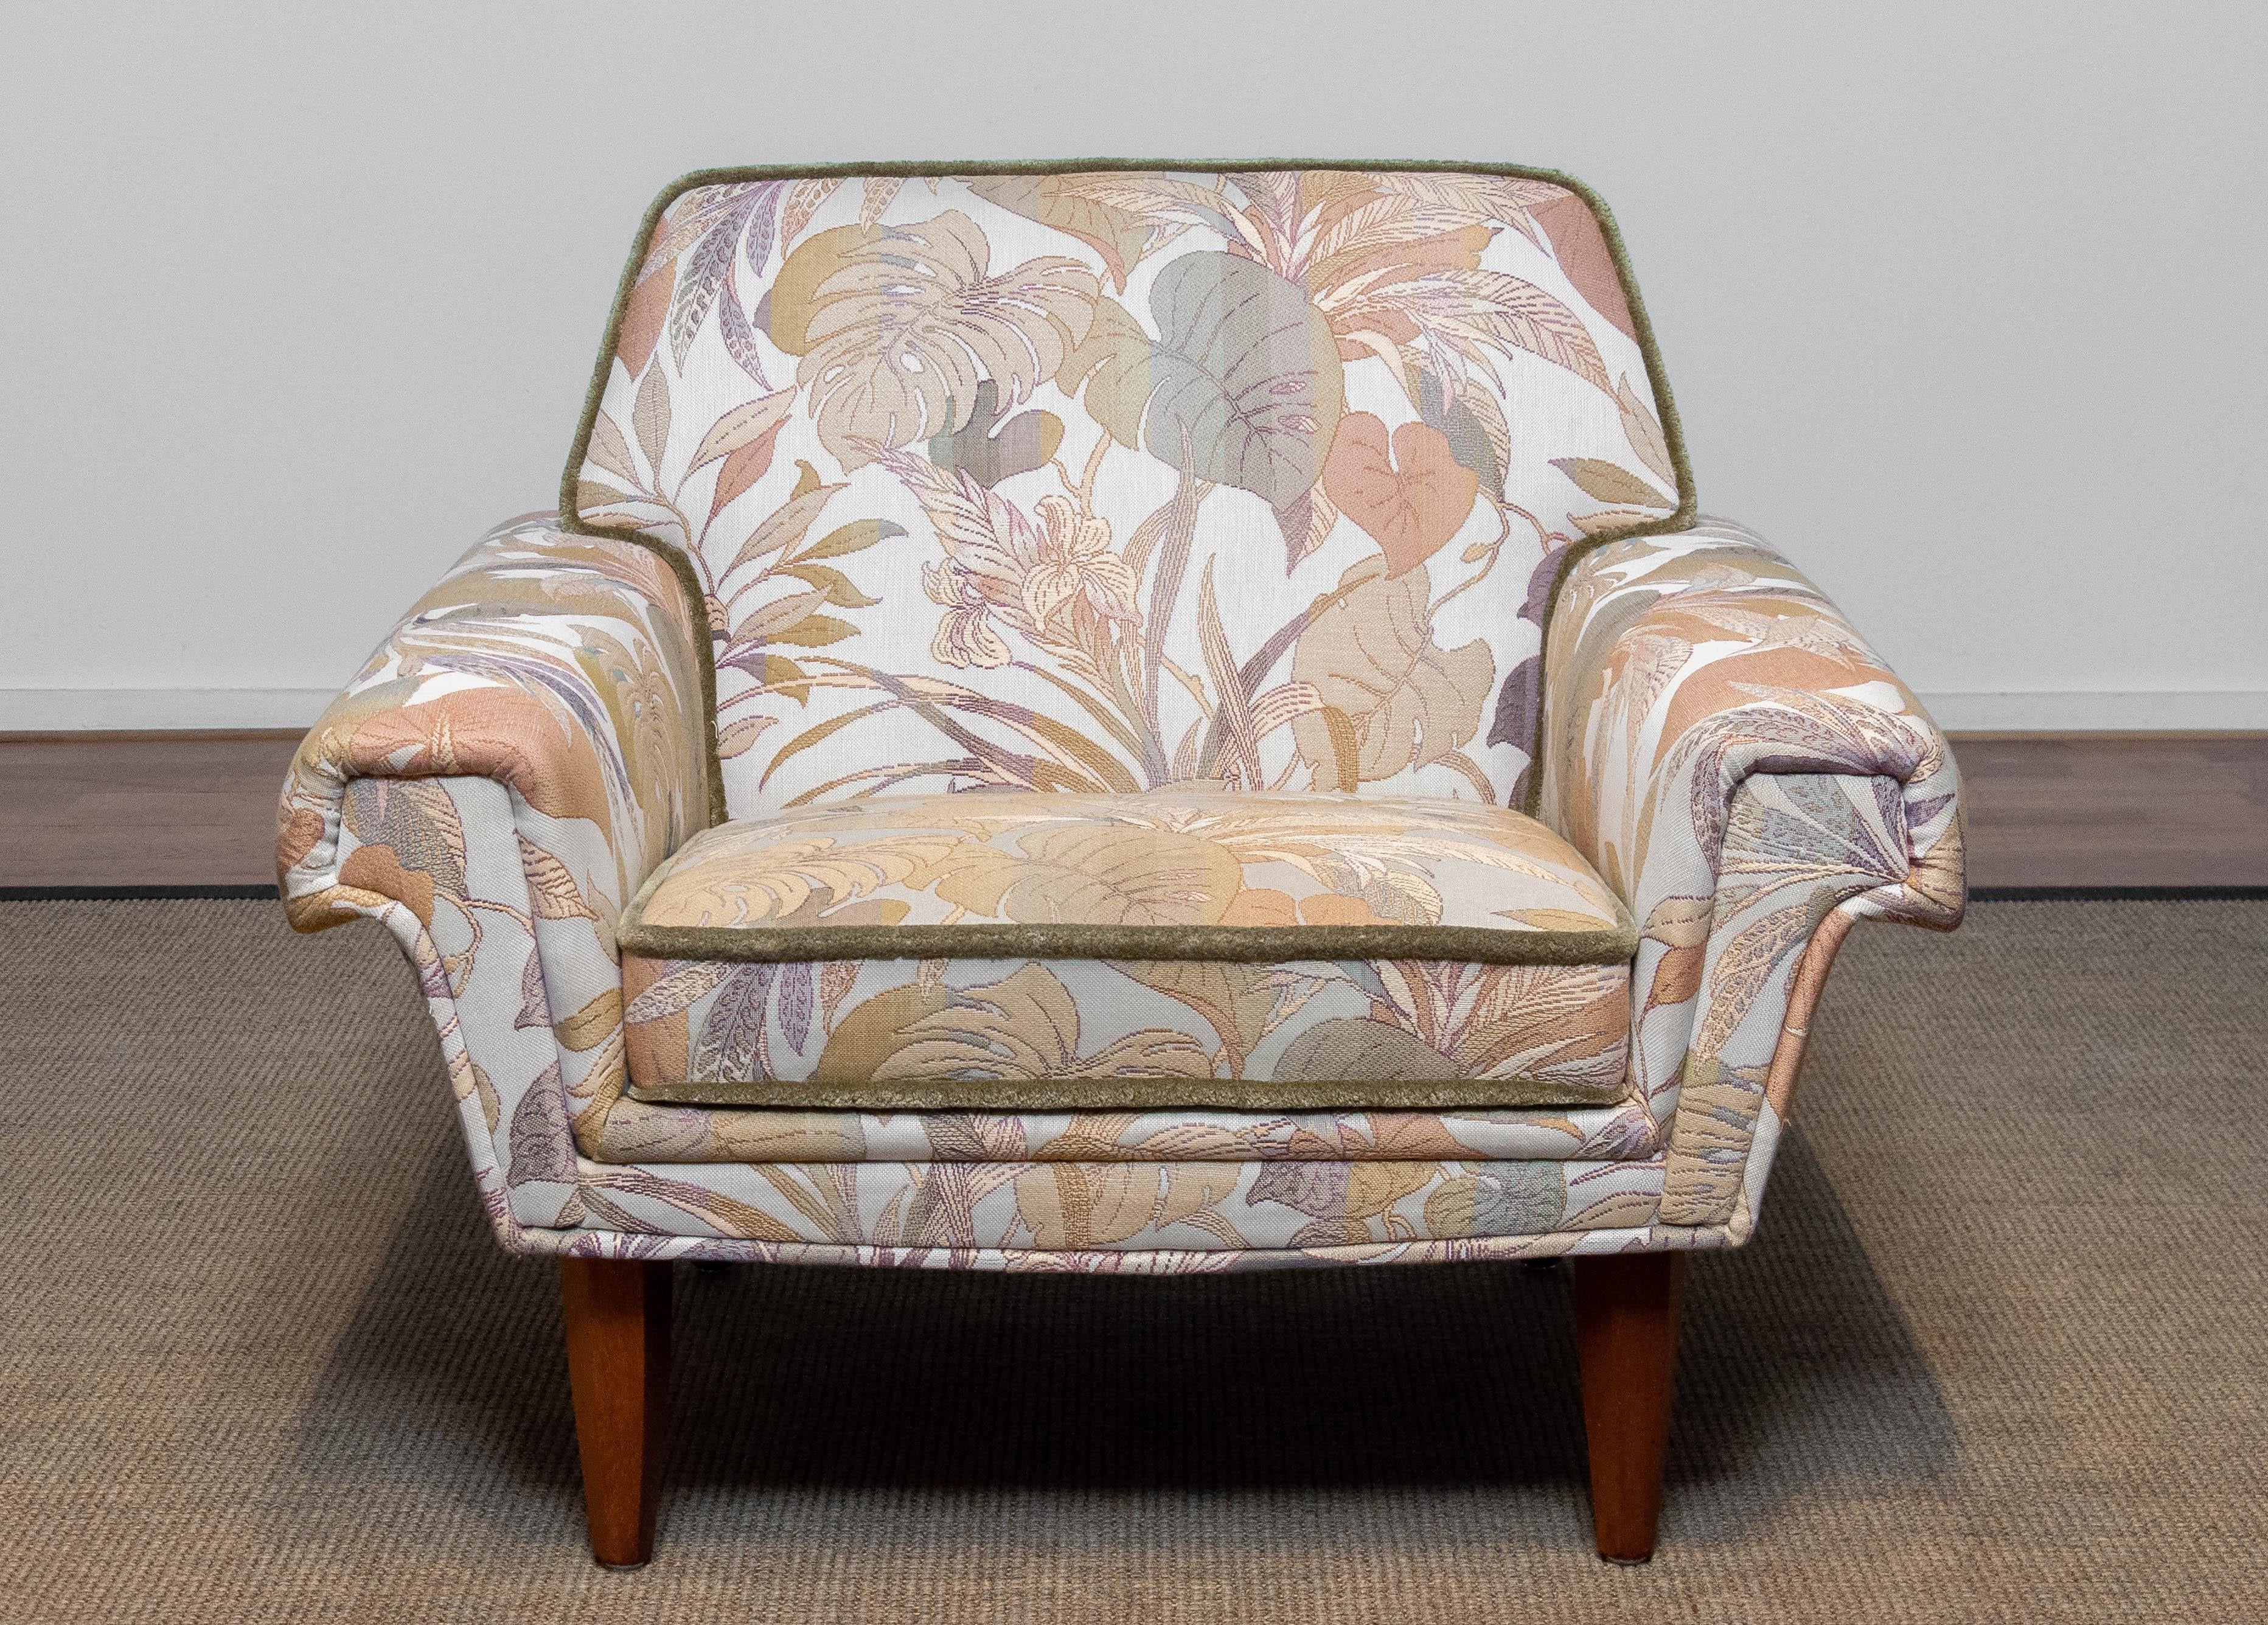 Danish Low Back Lounge Chair Upholstered Floral Jacquard Fabric from the 1970's For Sale 6